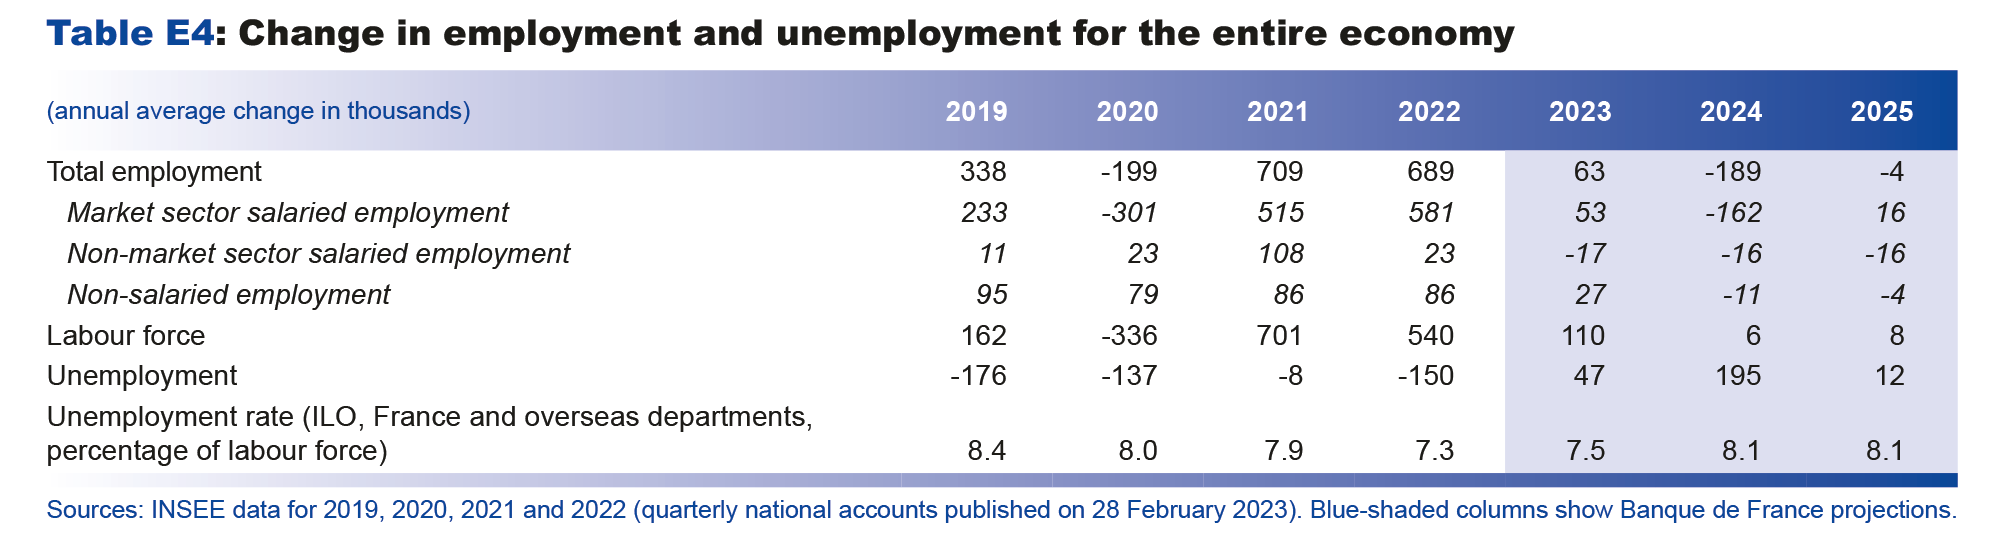 Macroeconomic projections – March 2023 - Change in employment and unemployment for the entire economy 